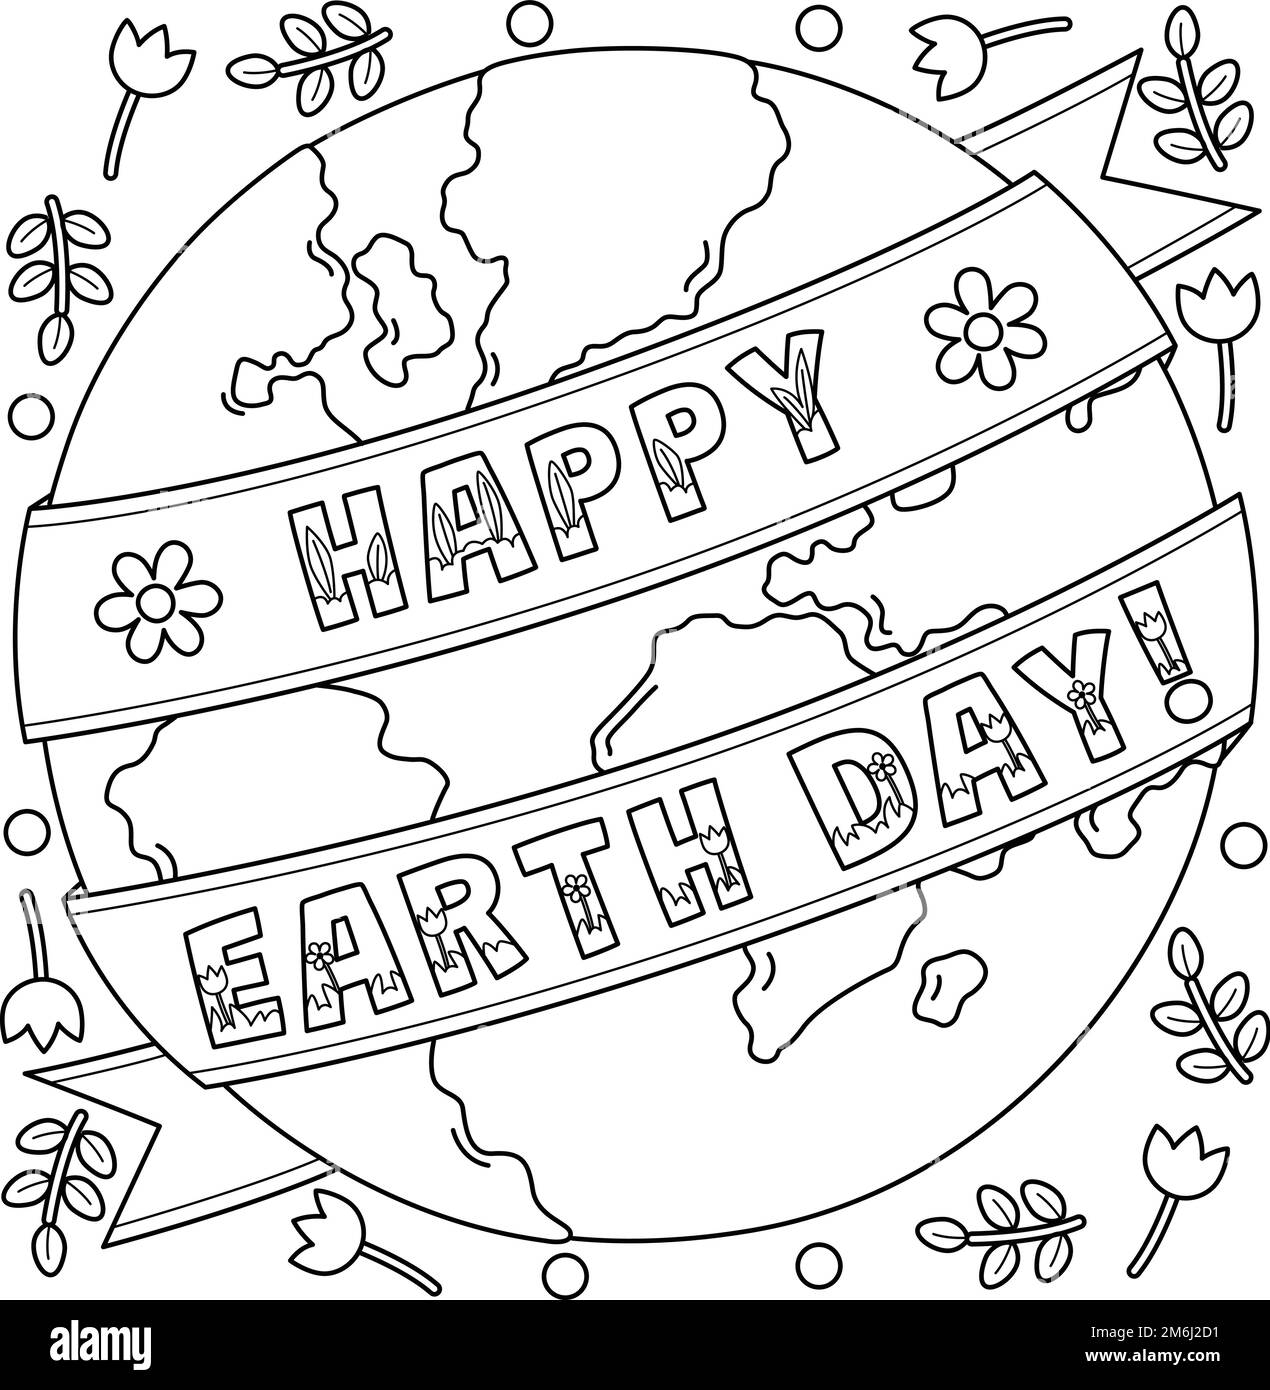 Happy Earth Day Coloring Page for Kids Stock Vector